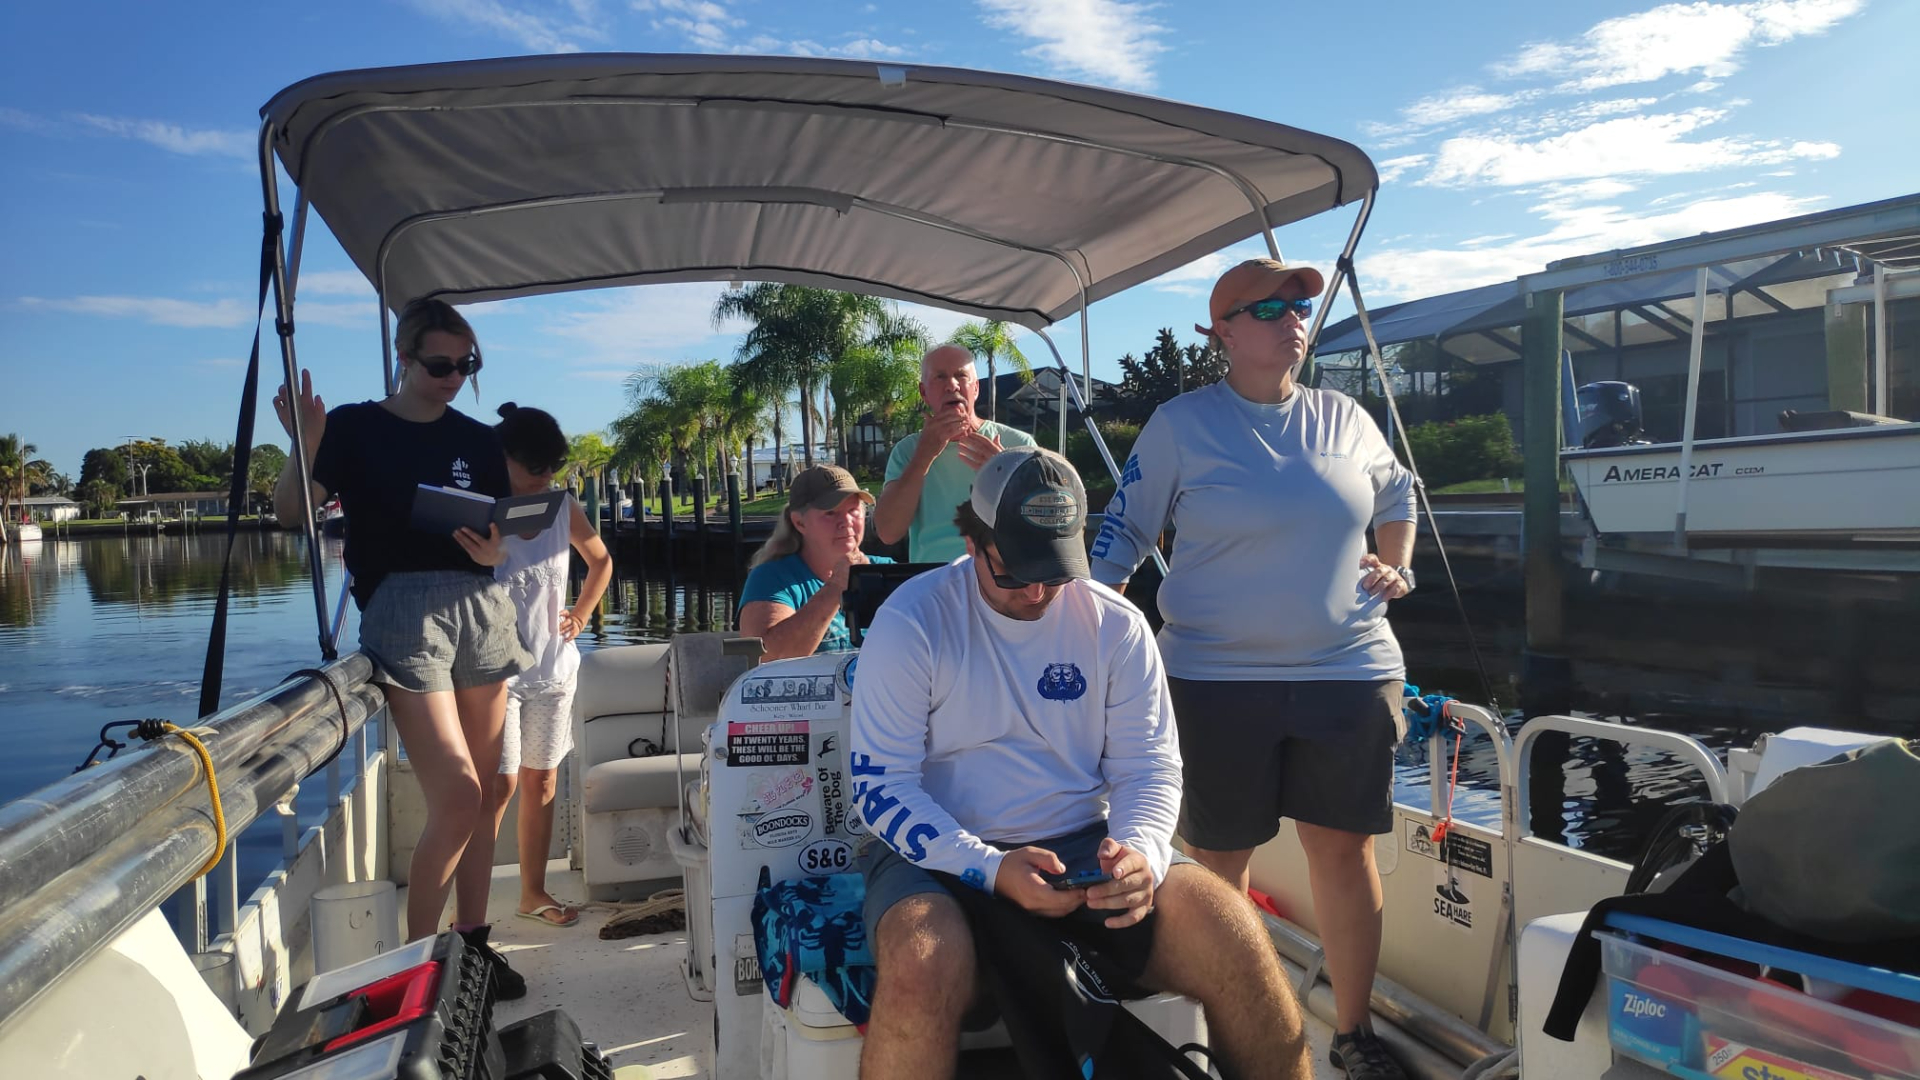 Putting in the coordinates to go to our first locating in Charlotte Harbor (from left to right: MSc Suzanne de Zwaan, dr. Francesca Sangiorgi, captain Ingrid, dr. Gregg Brooks, Vince Shonka and dr. Bekka Larson). Photo by BSc Sanne Haima.